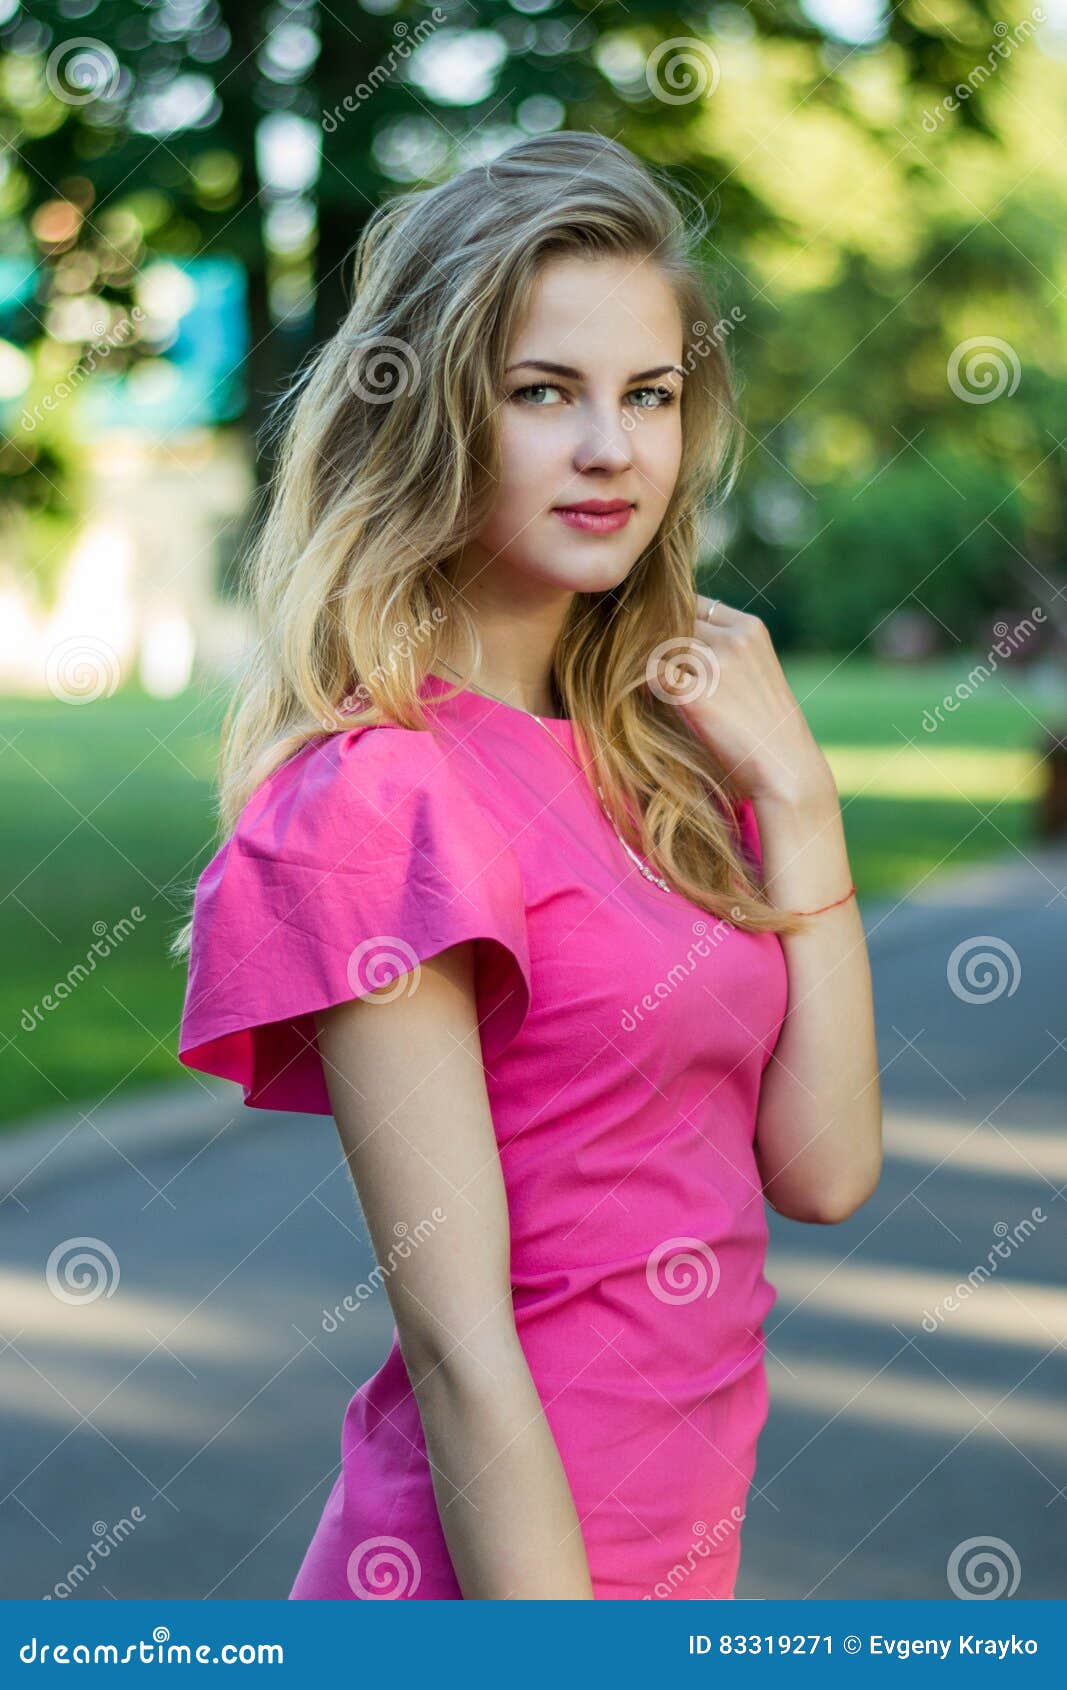 Portrait of a Beautiful Smiling Young Cute Girl in a Pink Summer Dress ...